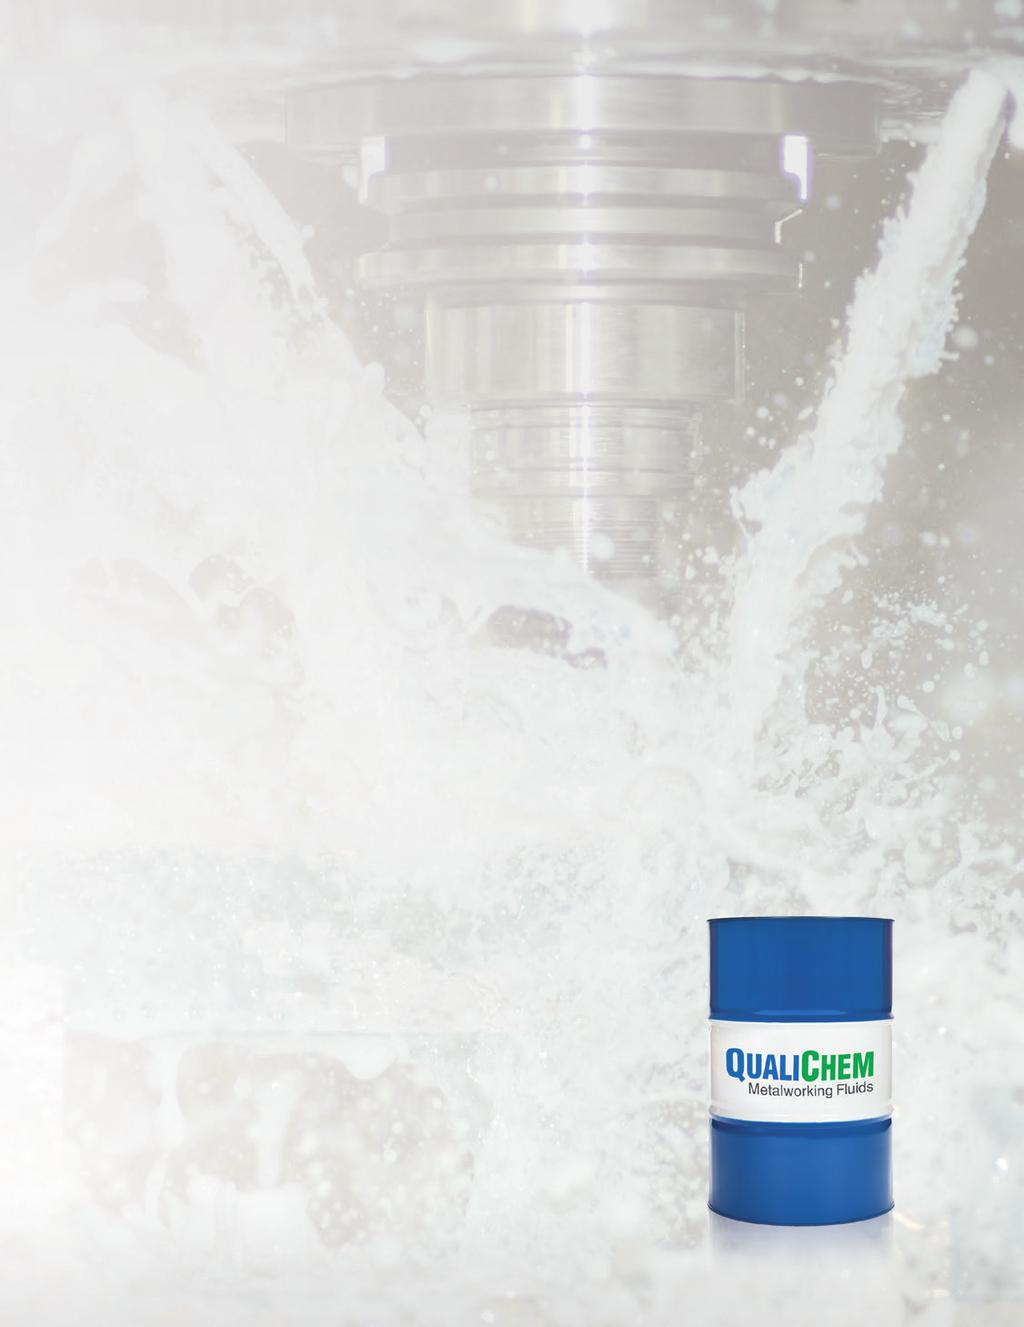 The QualiChem Family of Metalworking Fluids CUTTING, GRINDING & SPECIALTY FLUIDS WATER DILUTAbLE FLUIDS Premium Series XTREME COOL Full Solution Synthetics XTREME CUT Semi-Synthetics XTREME GRind